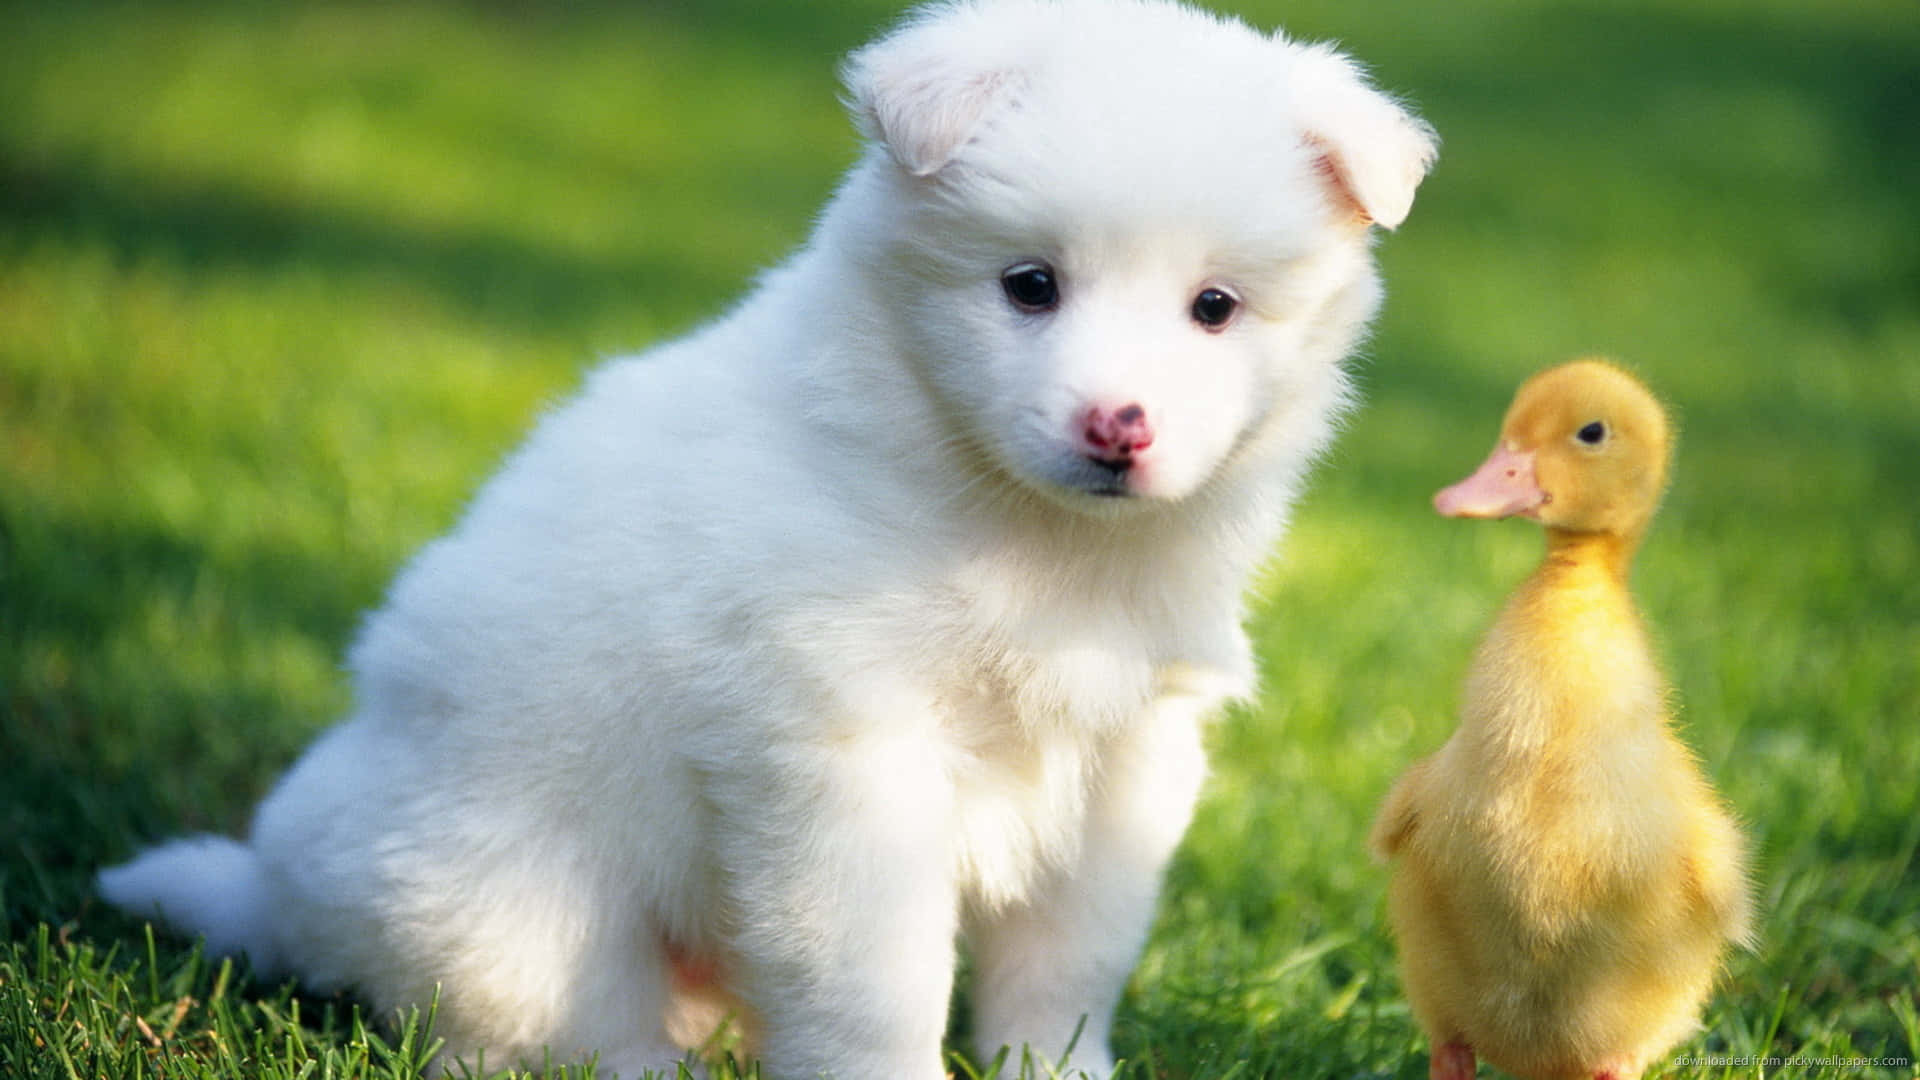 Cute Duck With A Puppy Wallpaper